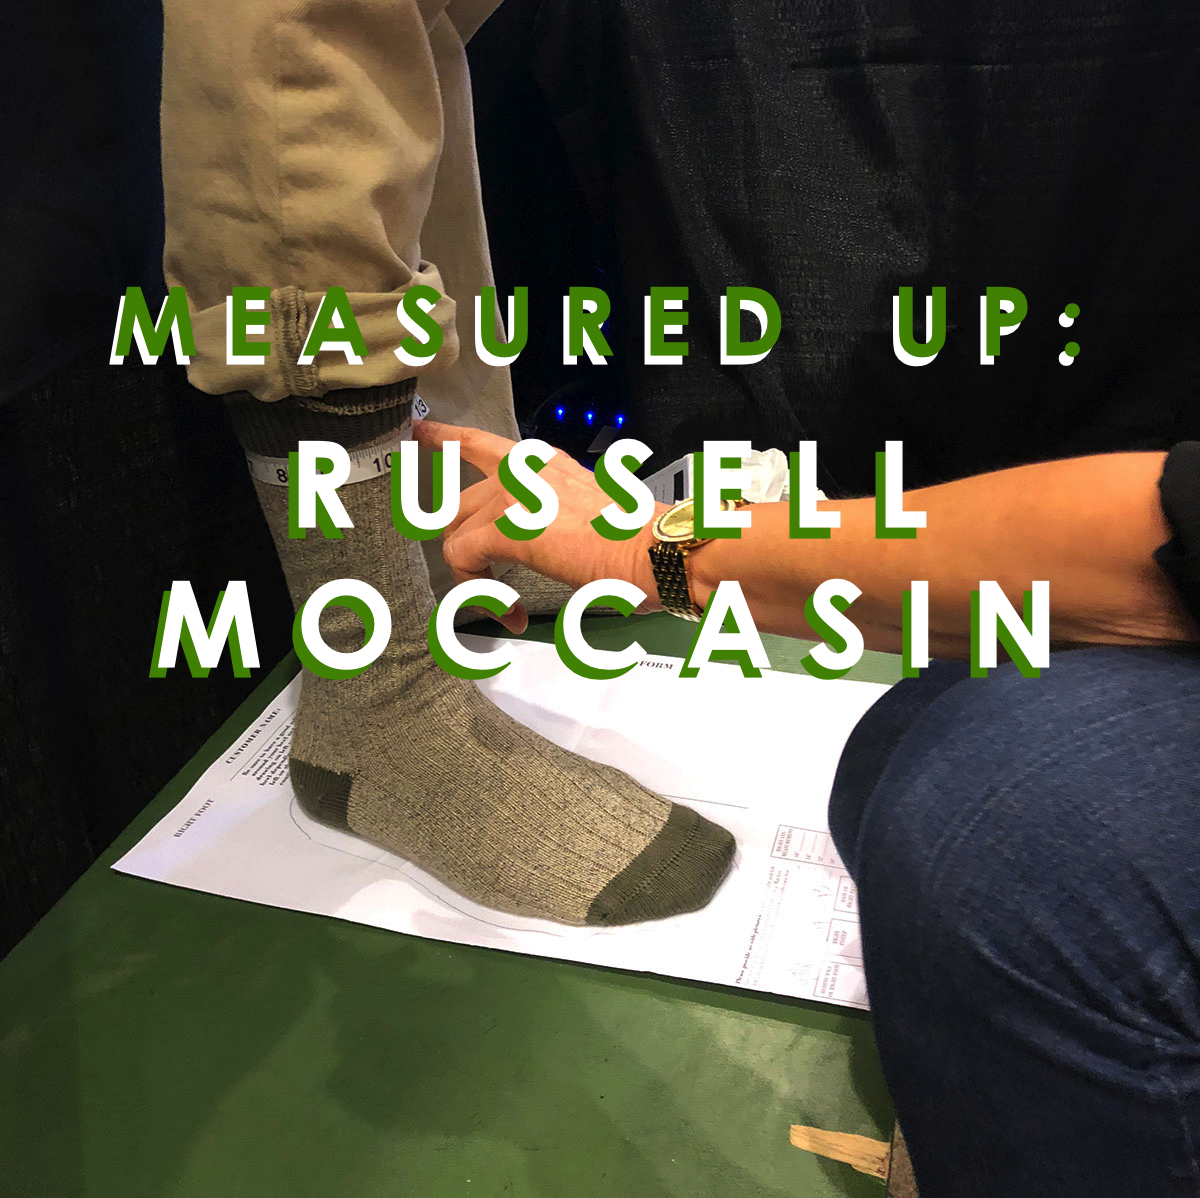 The Russell Moccasin Measuring Process